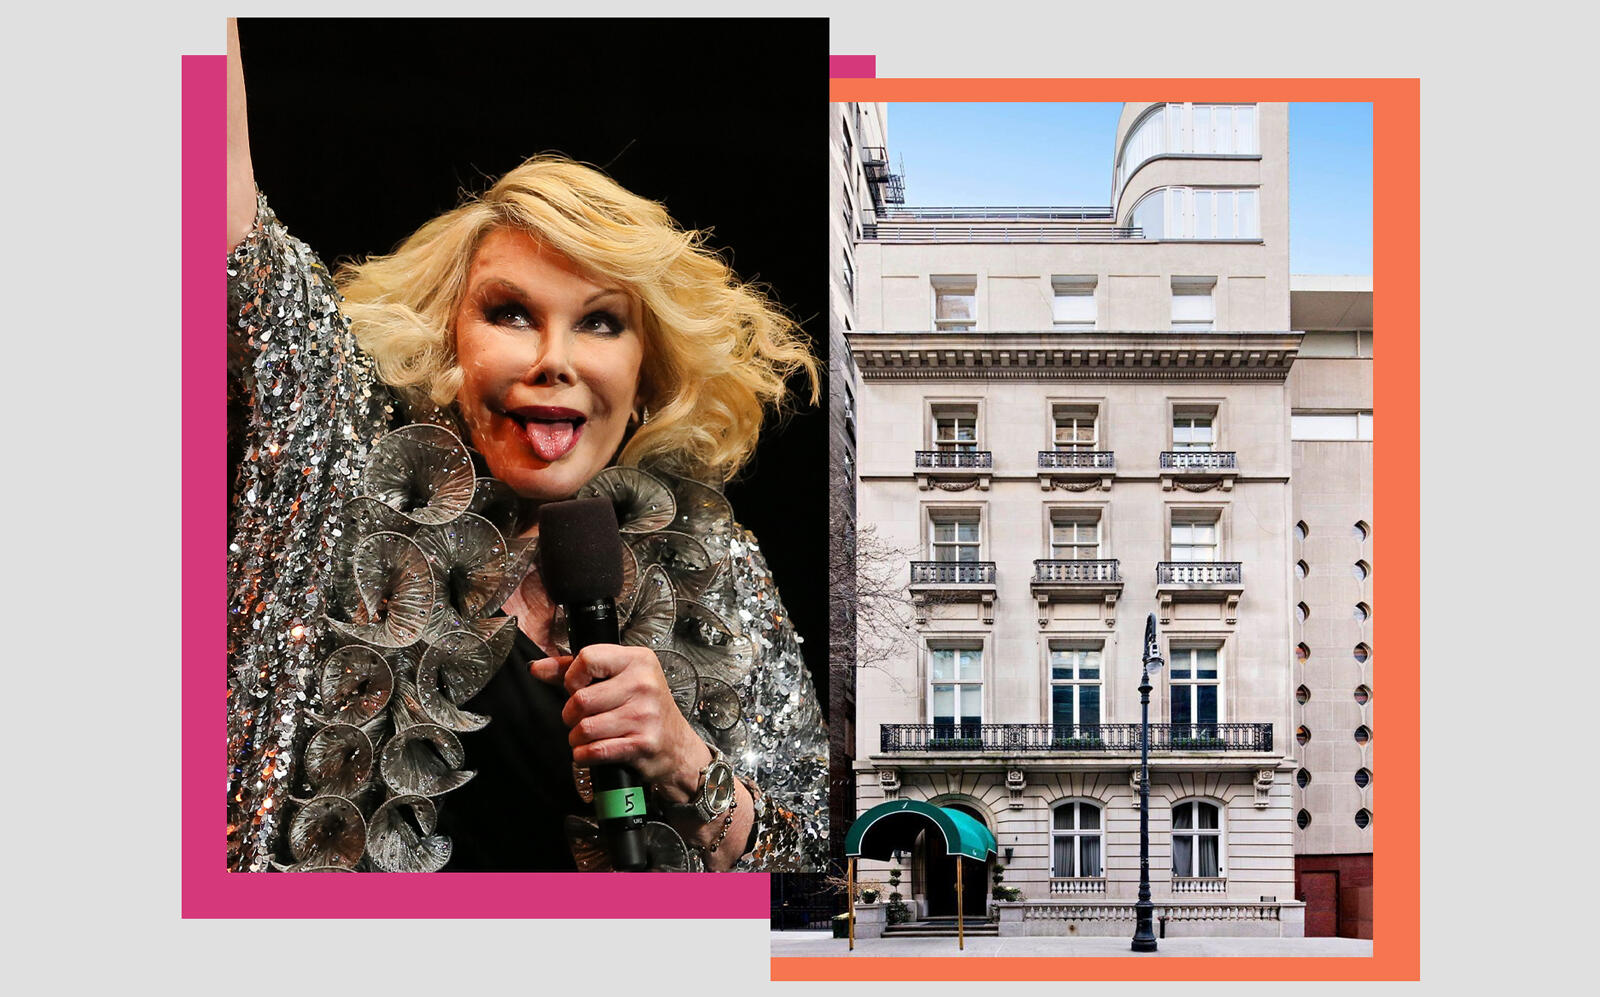  Joan Rivers and 1 East 62nd Street (Getty, Sotheby's)